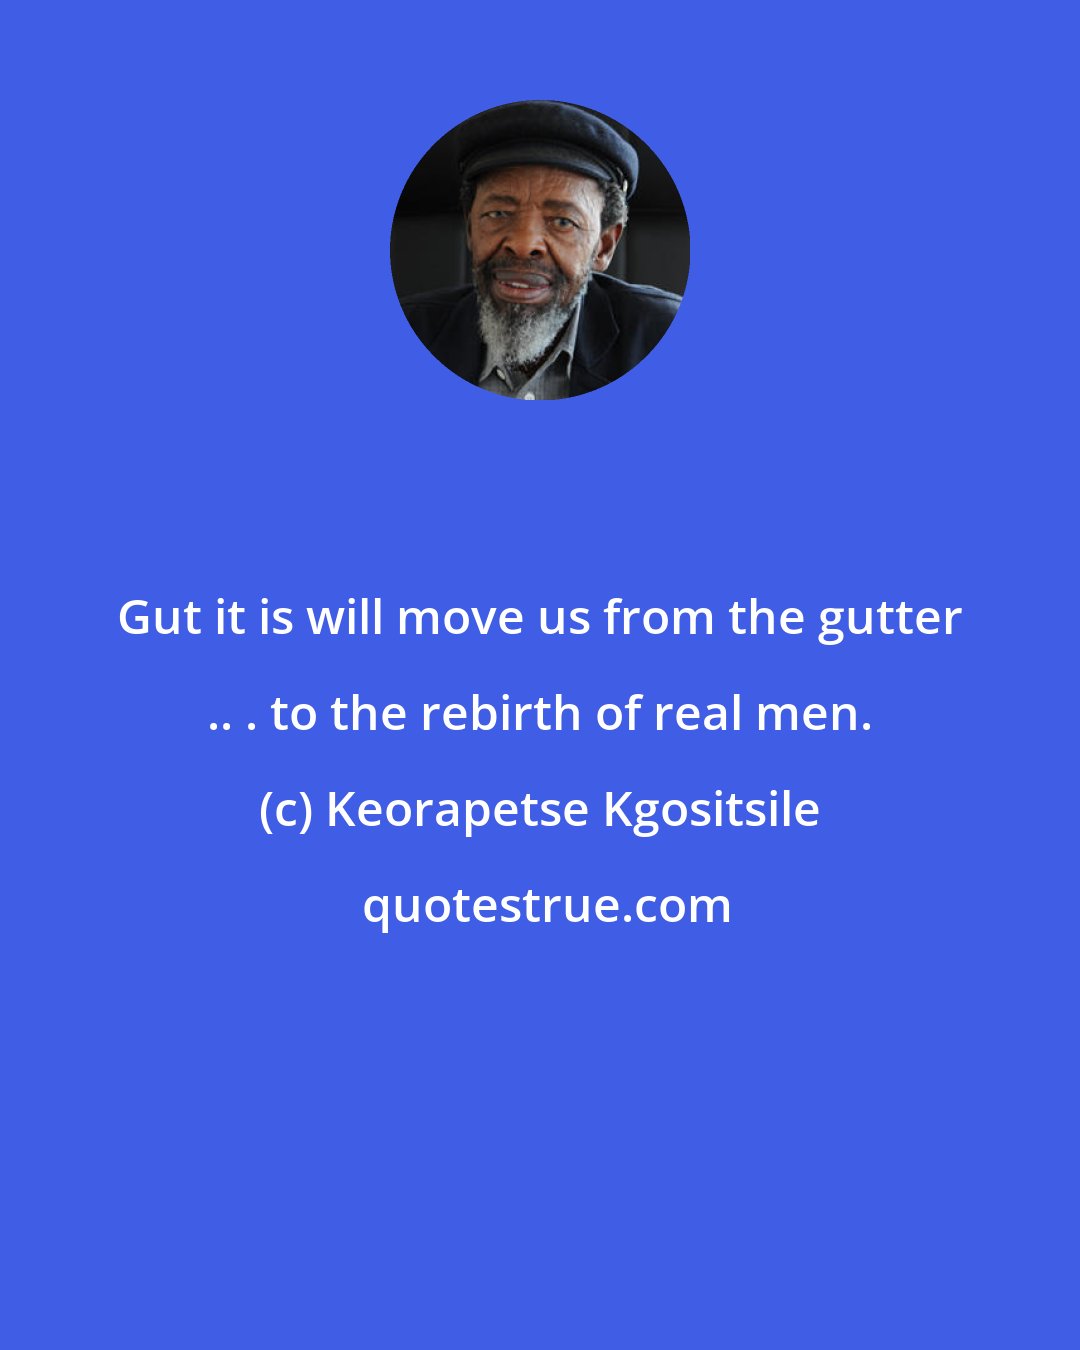 Keorapetse Kgositsile: Gut it is will move us from the gutter .. . to the rebirth of real men.